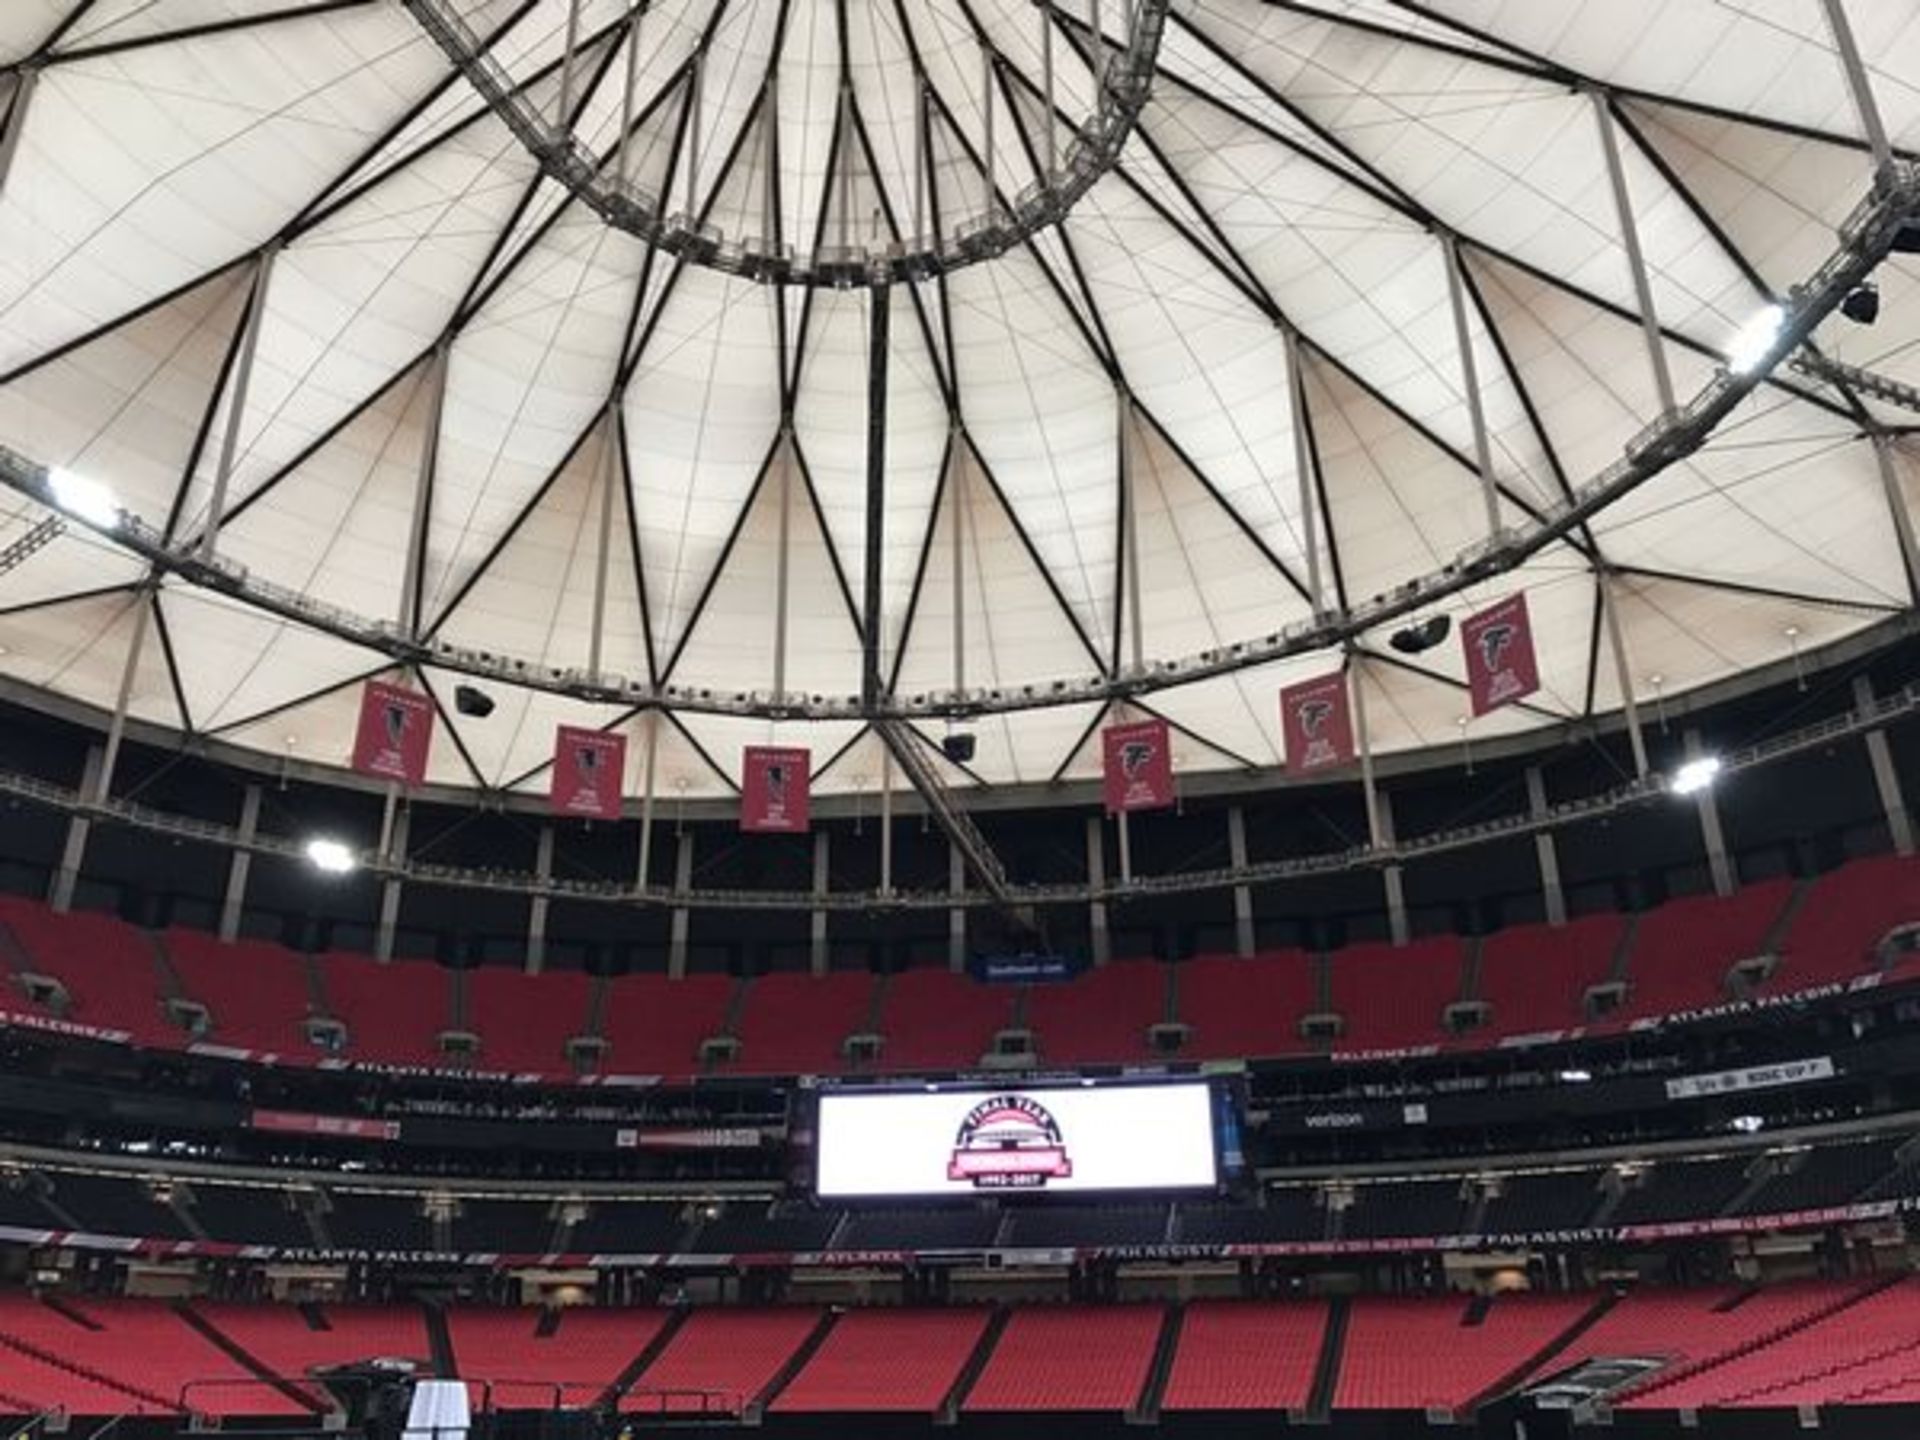 2010 NFC SOUTH, FALCONS CHAMPIONS BANNER / Authentic & Historic Banner Hung in GA Dome Rafters / - Image 2 of 2